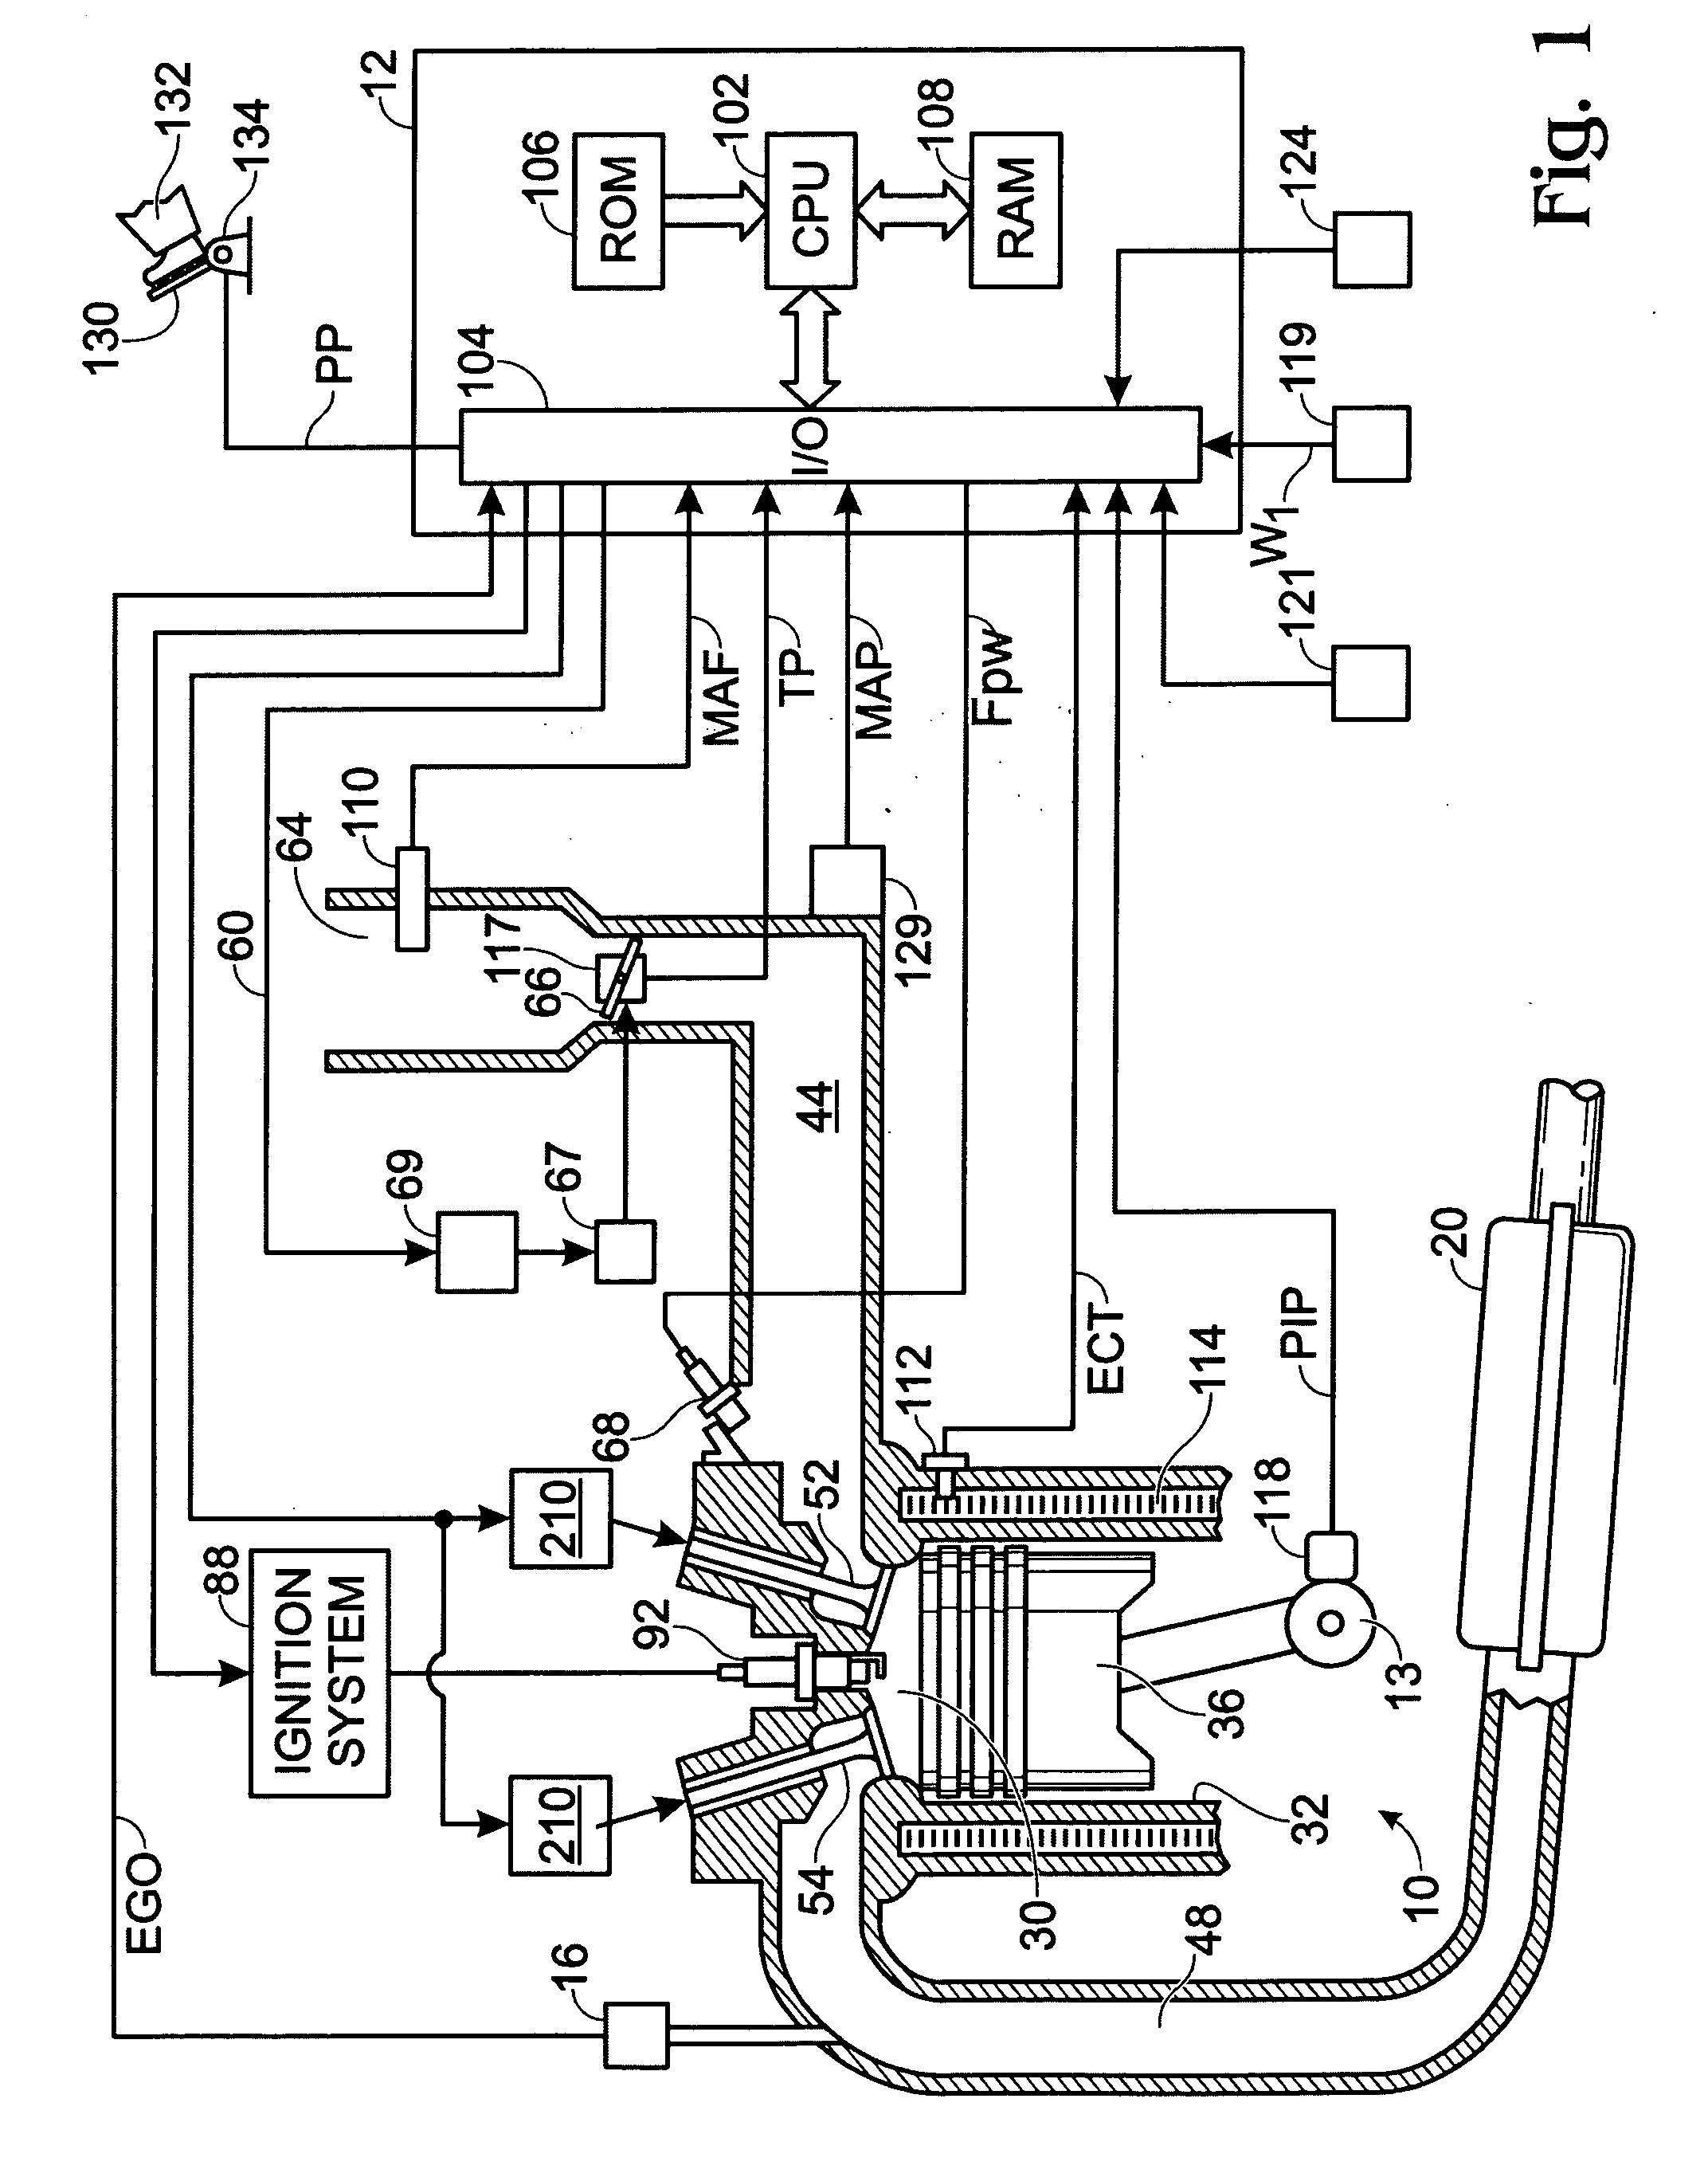 Enhanced permanent magnet electromagnetic actuator for an electronic valve actuation system of an engine